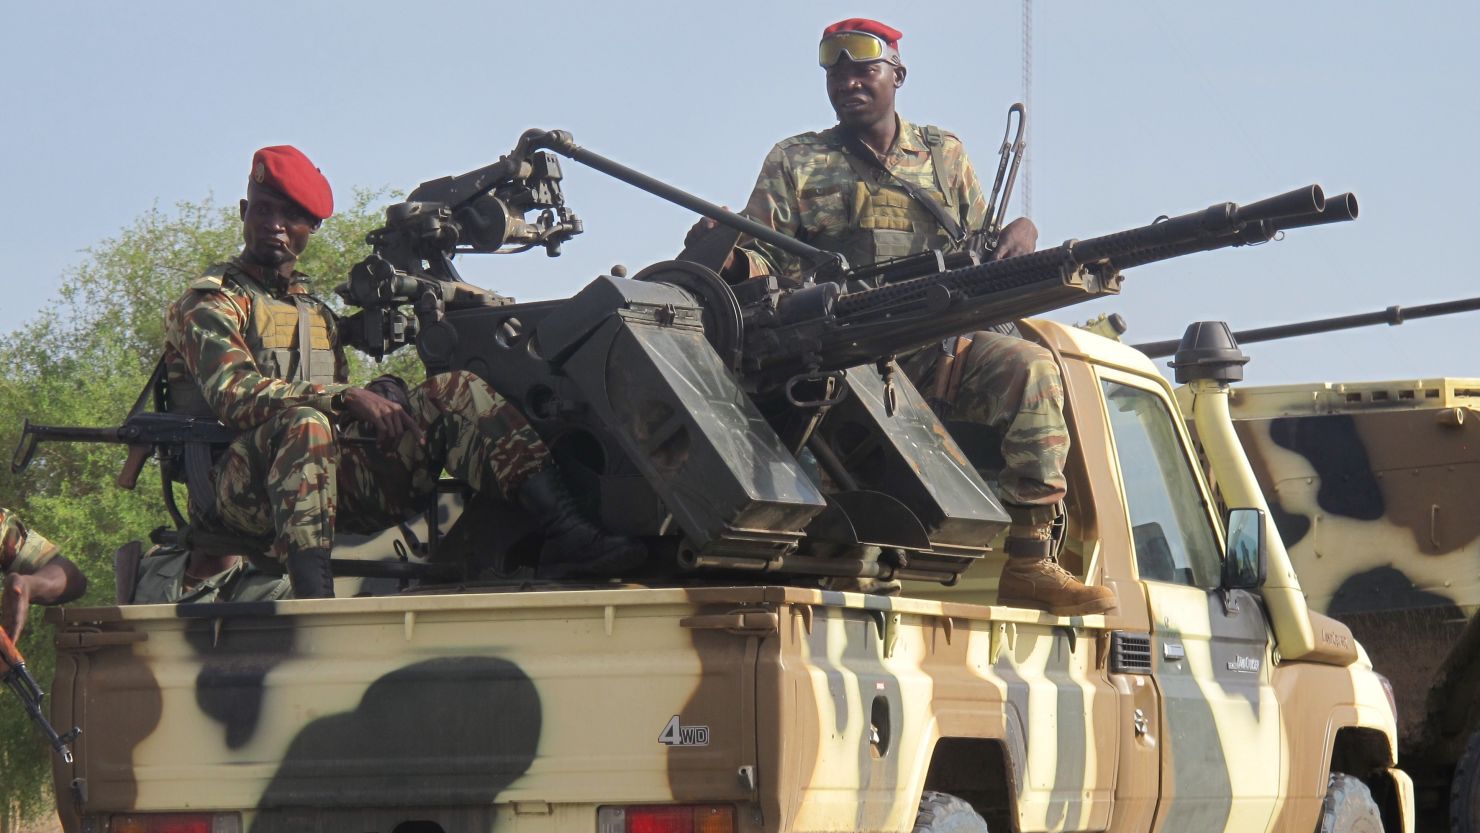 Cameroonian soldiers in the Far North Region in 2014, deployed to fight Boko Haram insurgents.